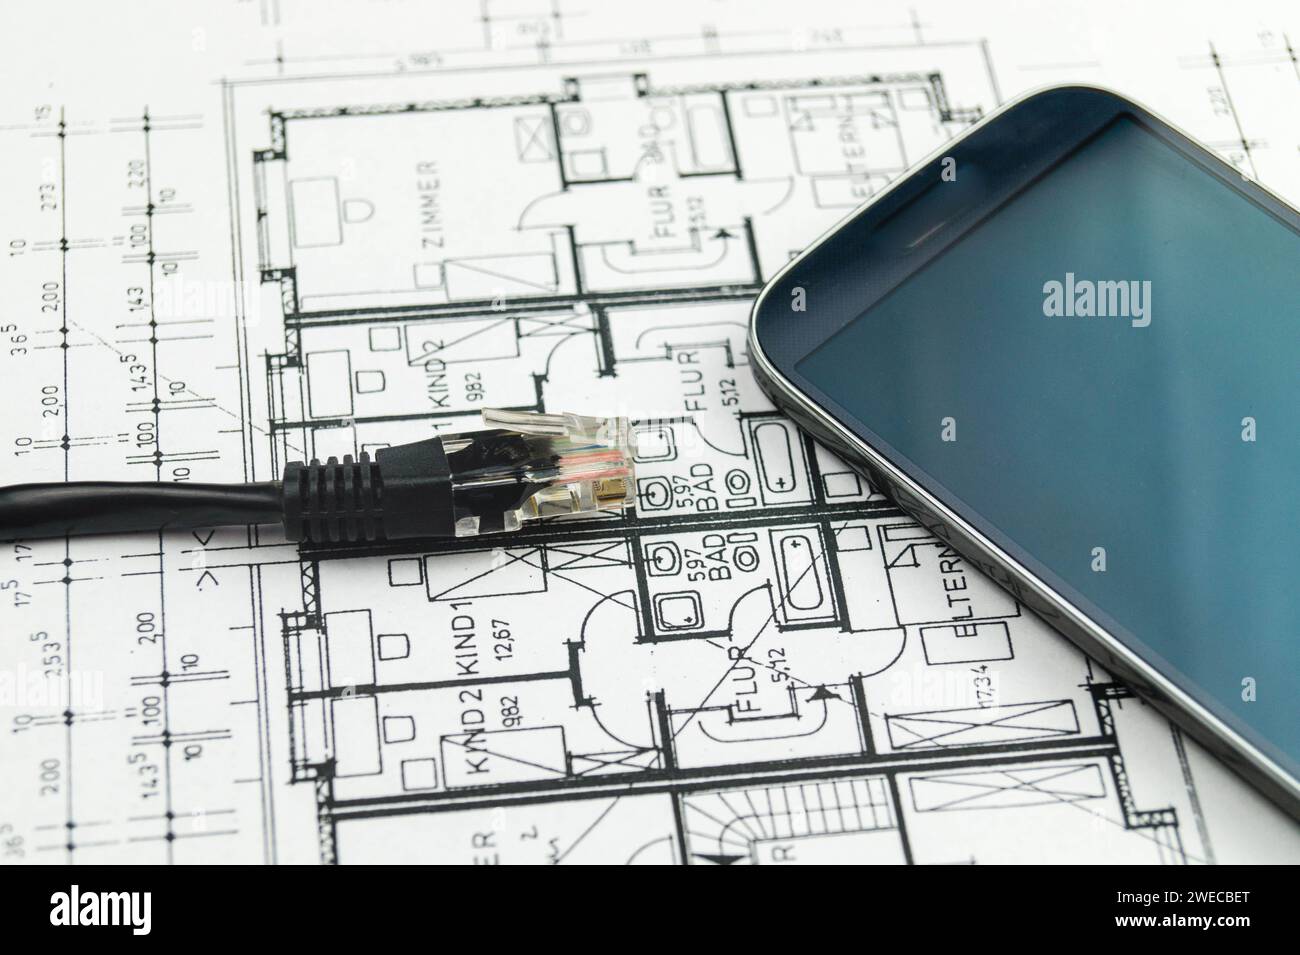 Network plug and smartphone on construction drawing, symbolic image for Smart Home Stock Photo